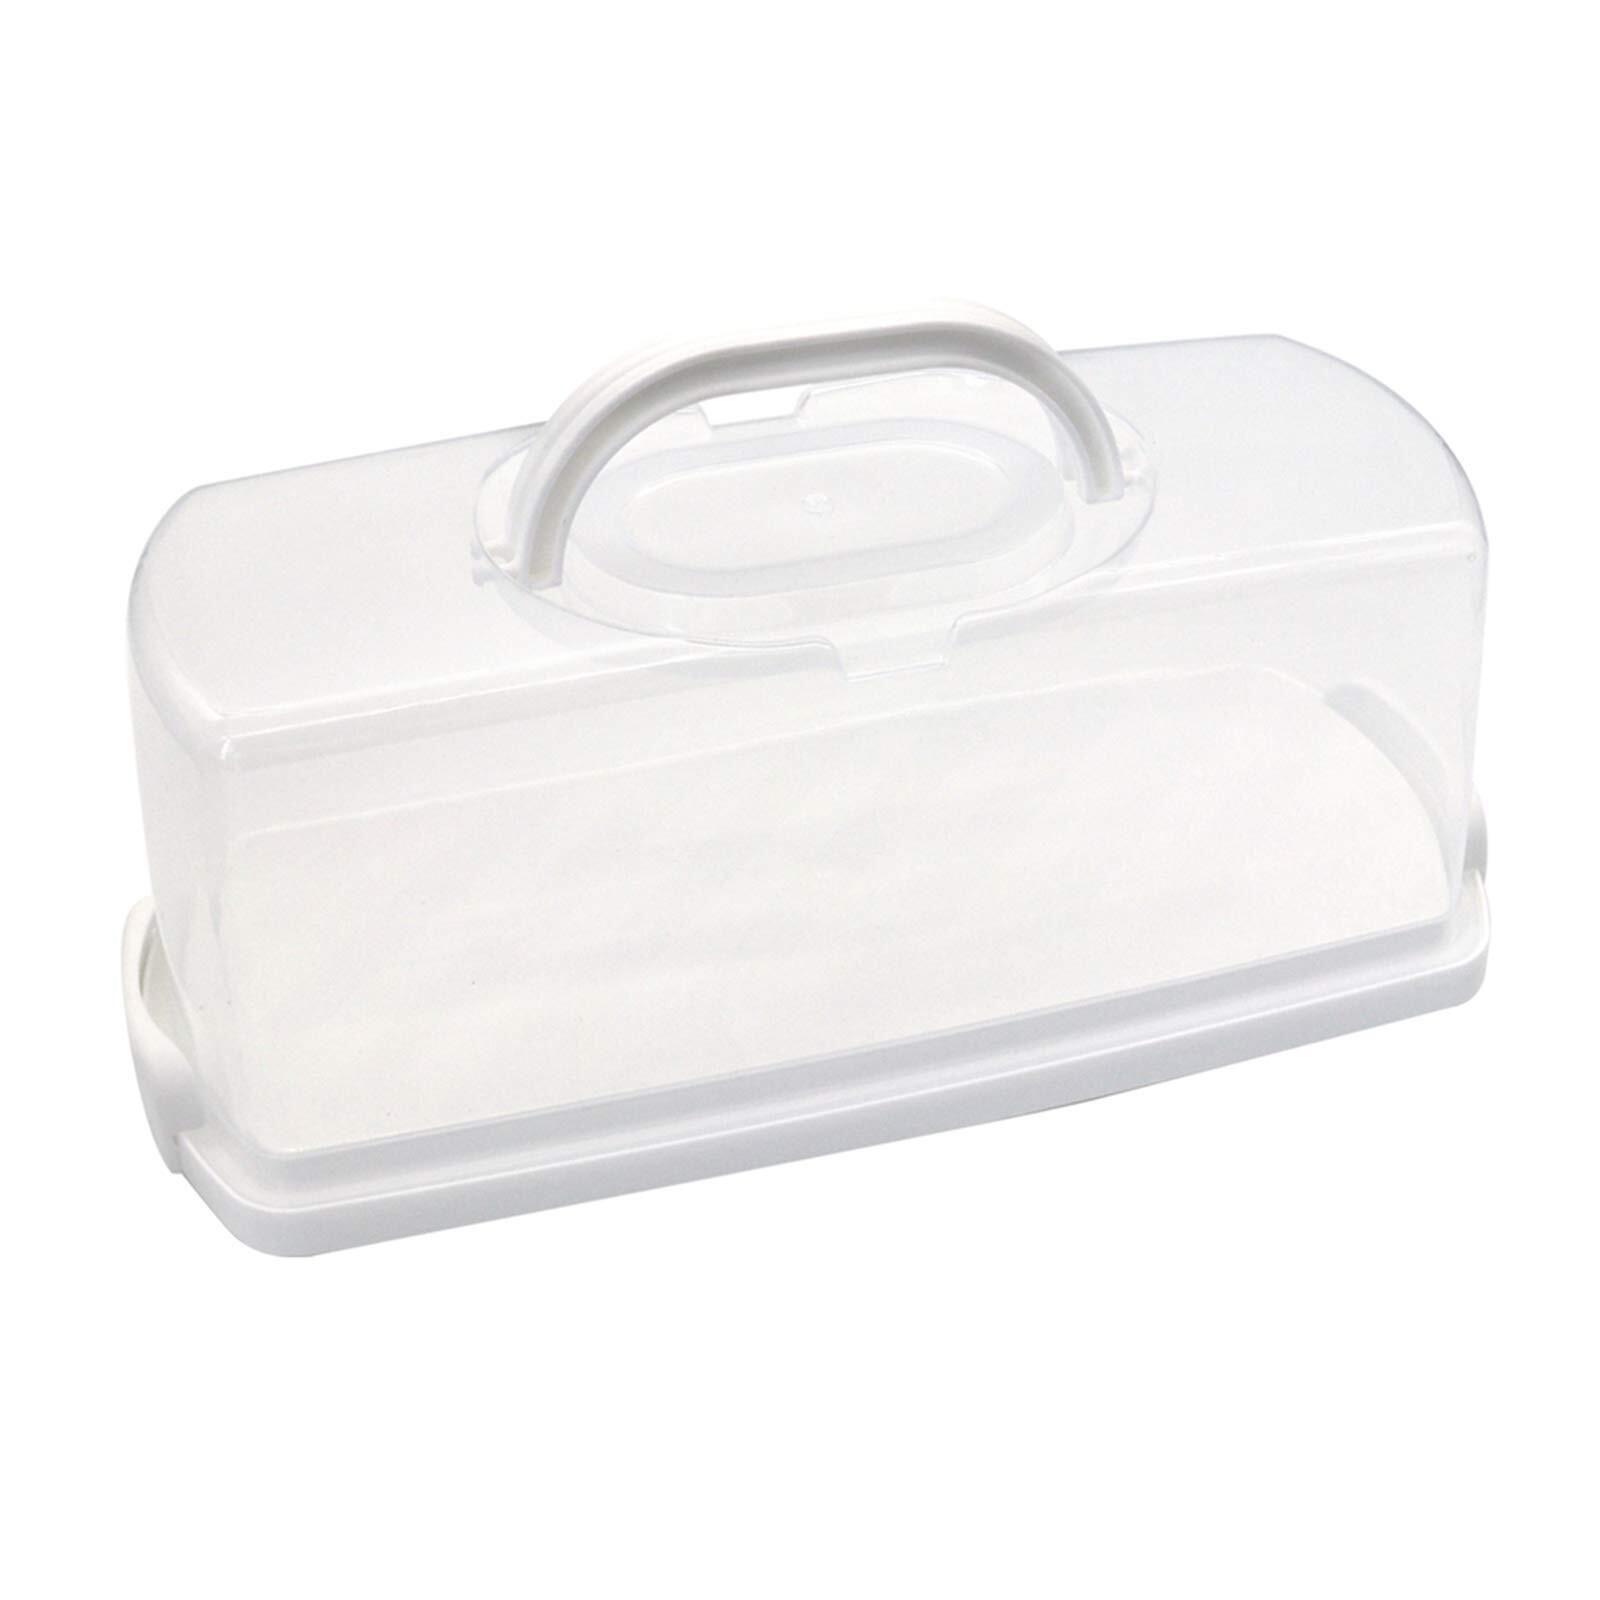 Plastic Rectangular Bread Box with Portable Handle, Loaf Cake Storage Contain...